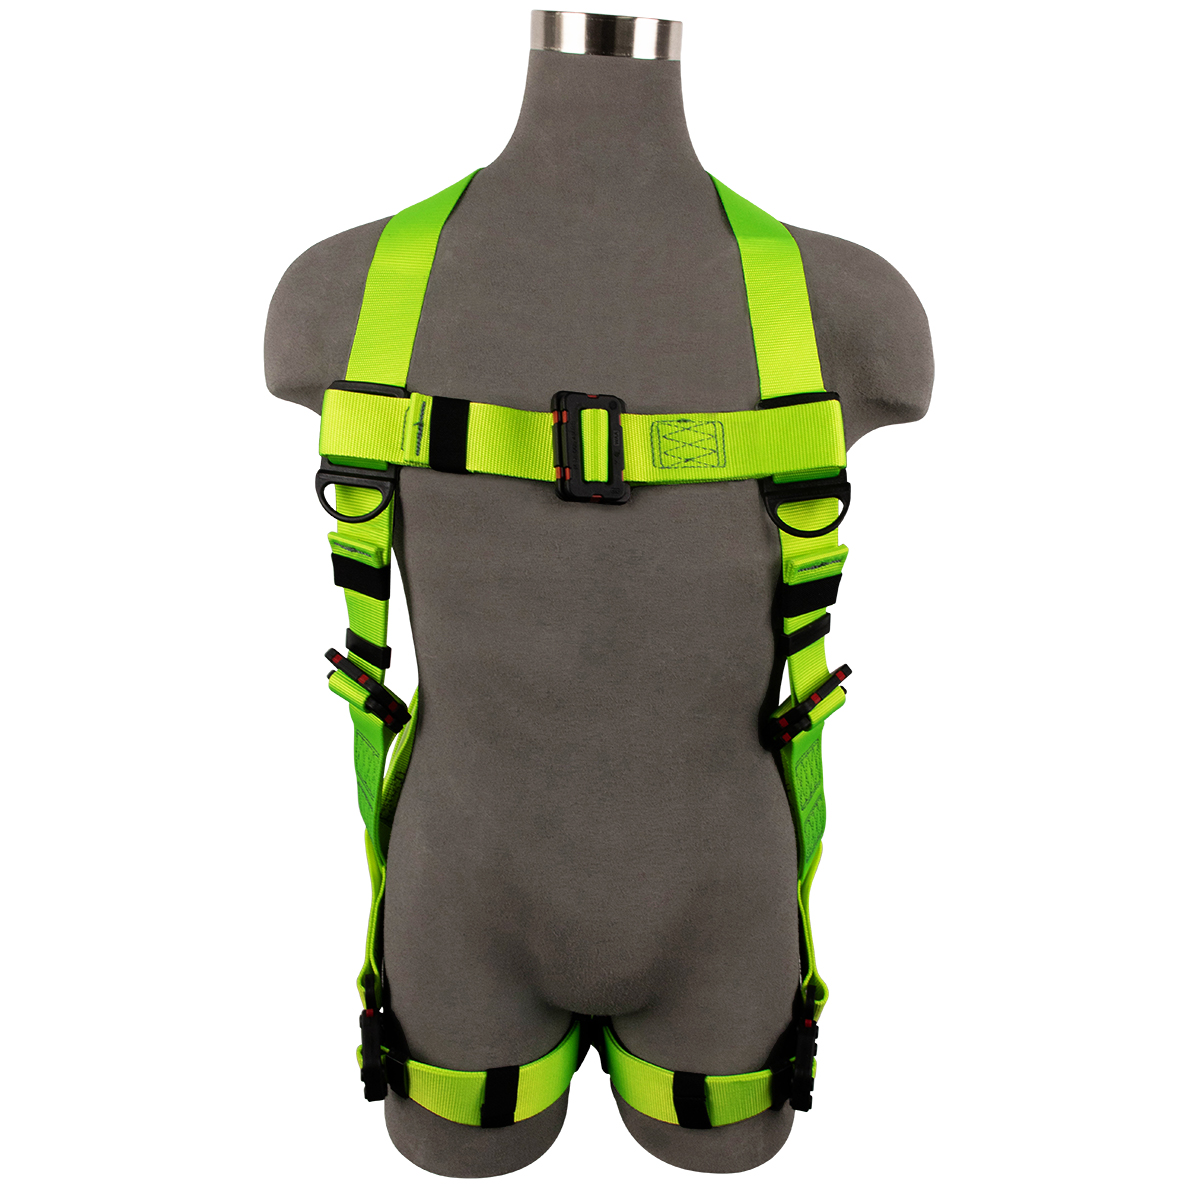 SAFEWAZE PRO+ Arc Flash Dielectric Harness with Pass through Dielectric on Chest and Quick-Connect Legs with Soft Loop Back D-Ring: 2XL